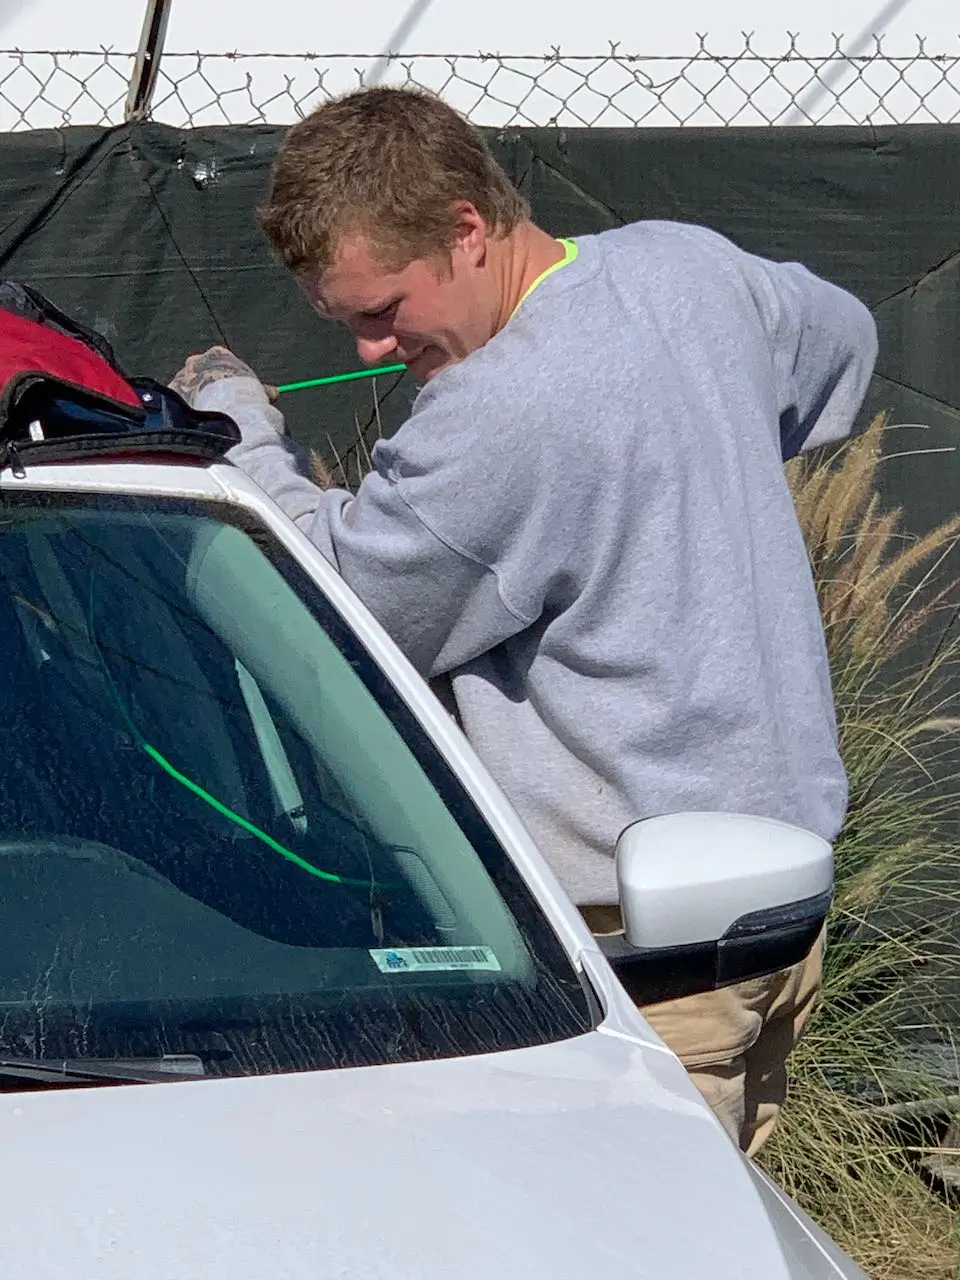 car lockout Unlocking a locked car. Brandon learning the ropes for All Roadside Towing Company La Jolla. - 